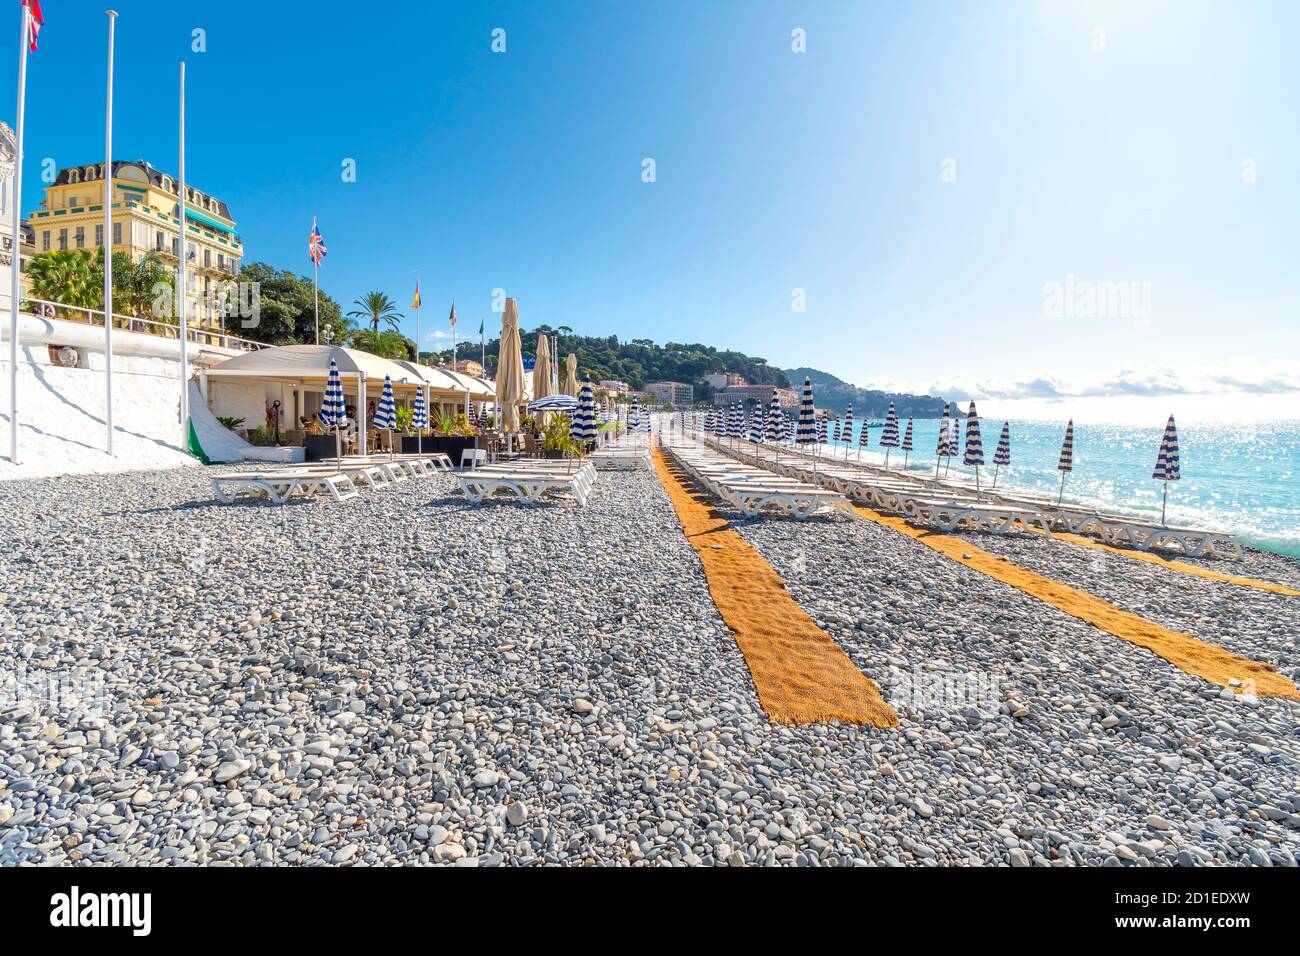 An empty private club along the pebble beach at the Bay of Angels, in the Cote d'Azure area of the French Riviera Stock Photo